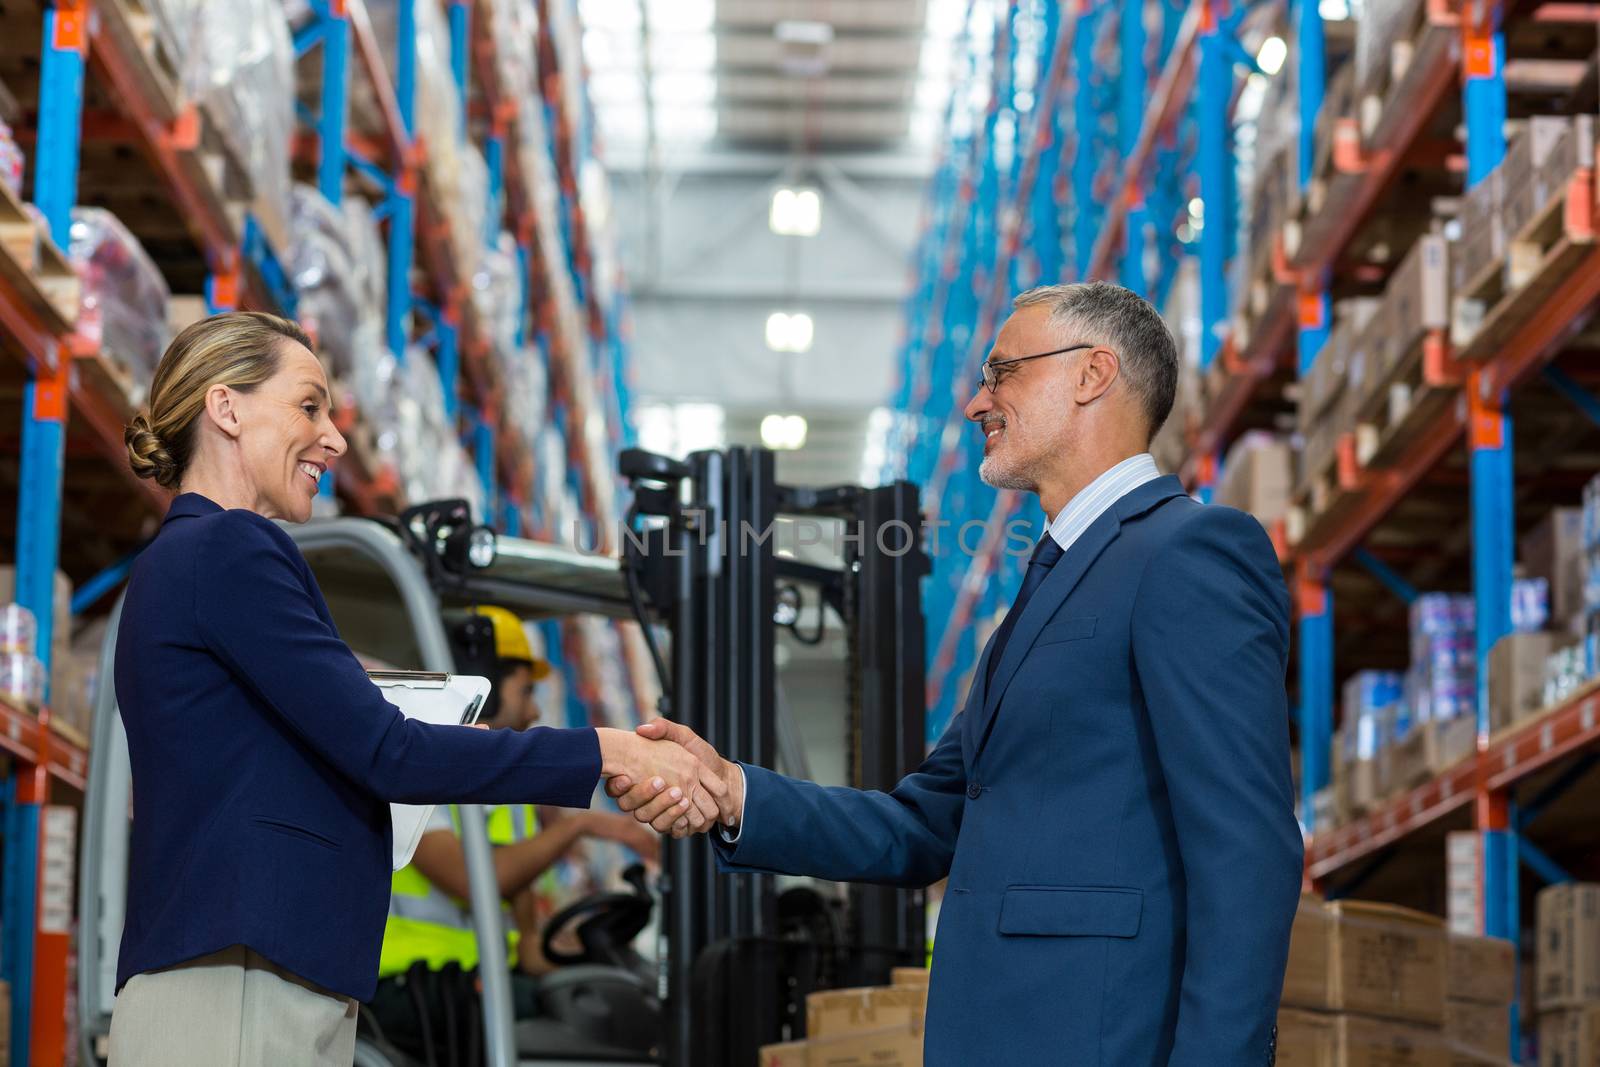 Business people are handshaking and smiling in a warehouse